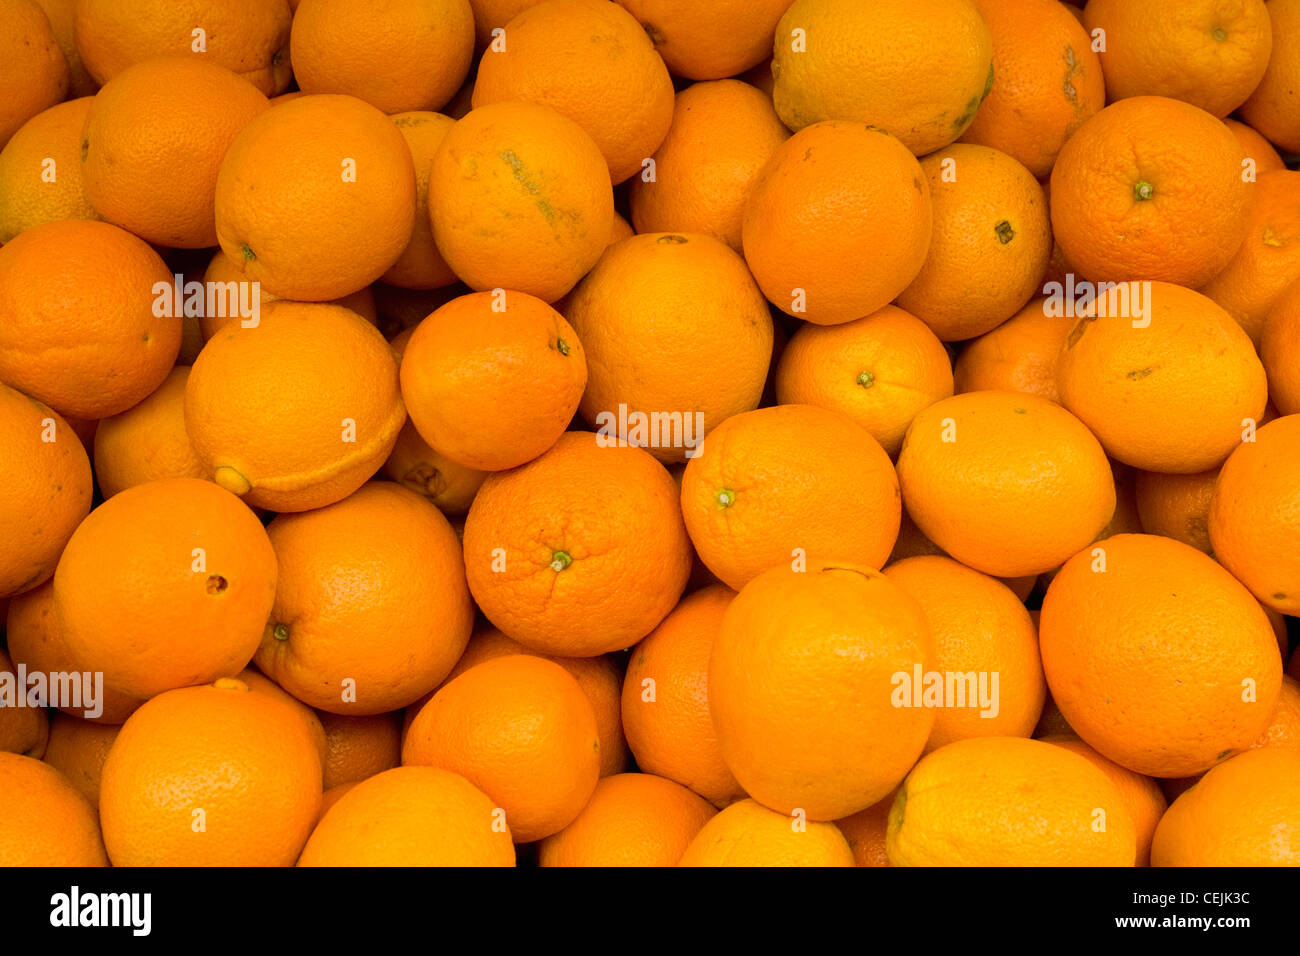 Agriculture - Harvested Navel oranges / San Joaquin County, California, USA. Stock Photo